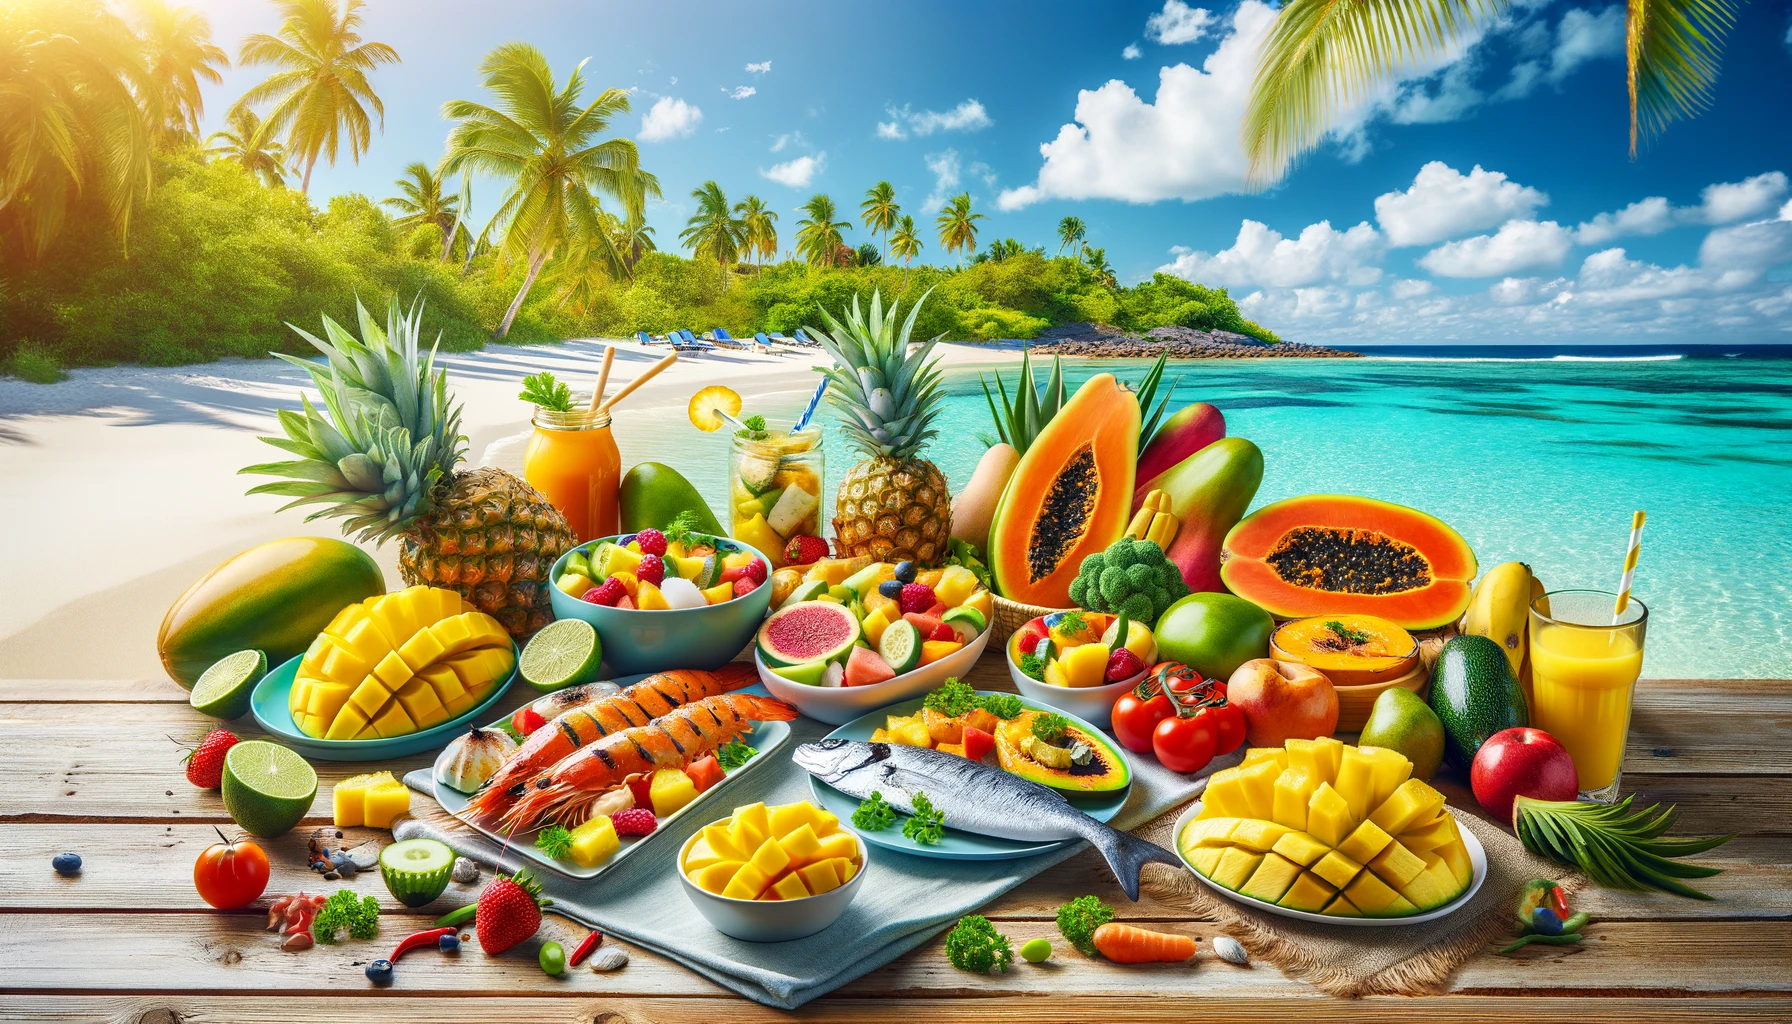 Caribbean Clean Eating Tropical Fruits and Seafood for Weight Loss